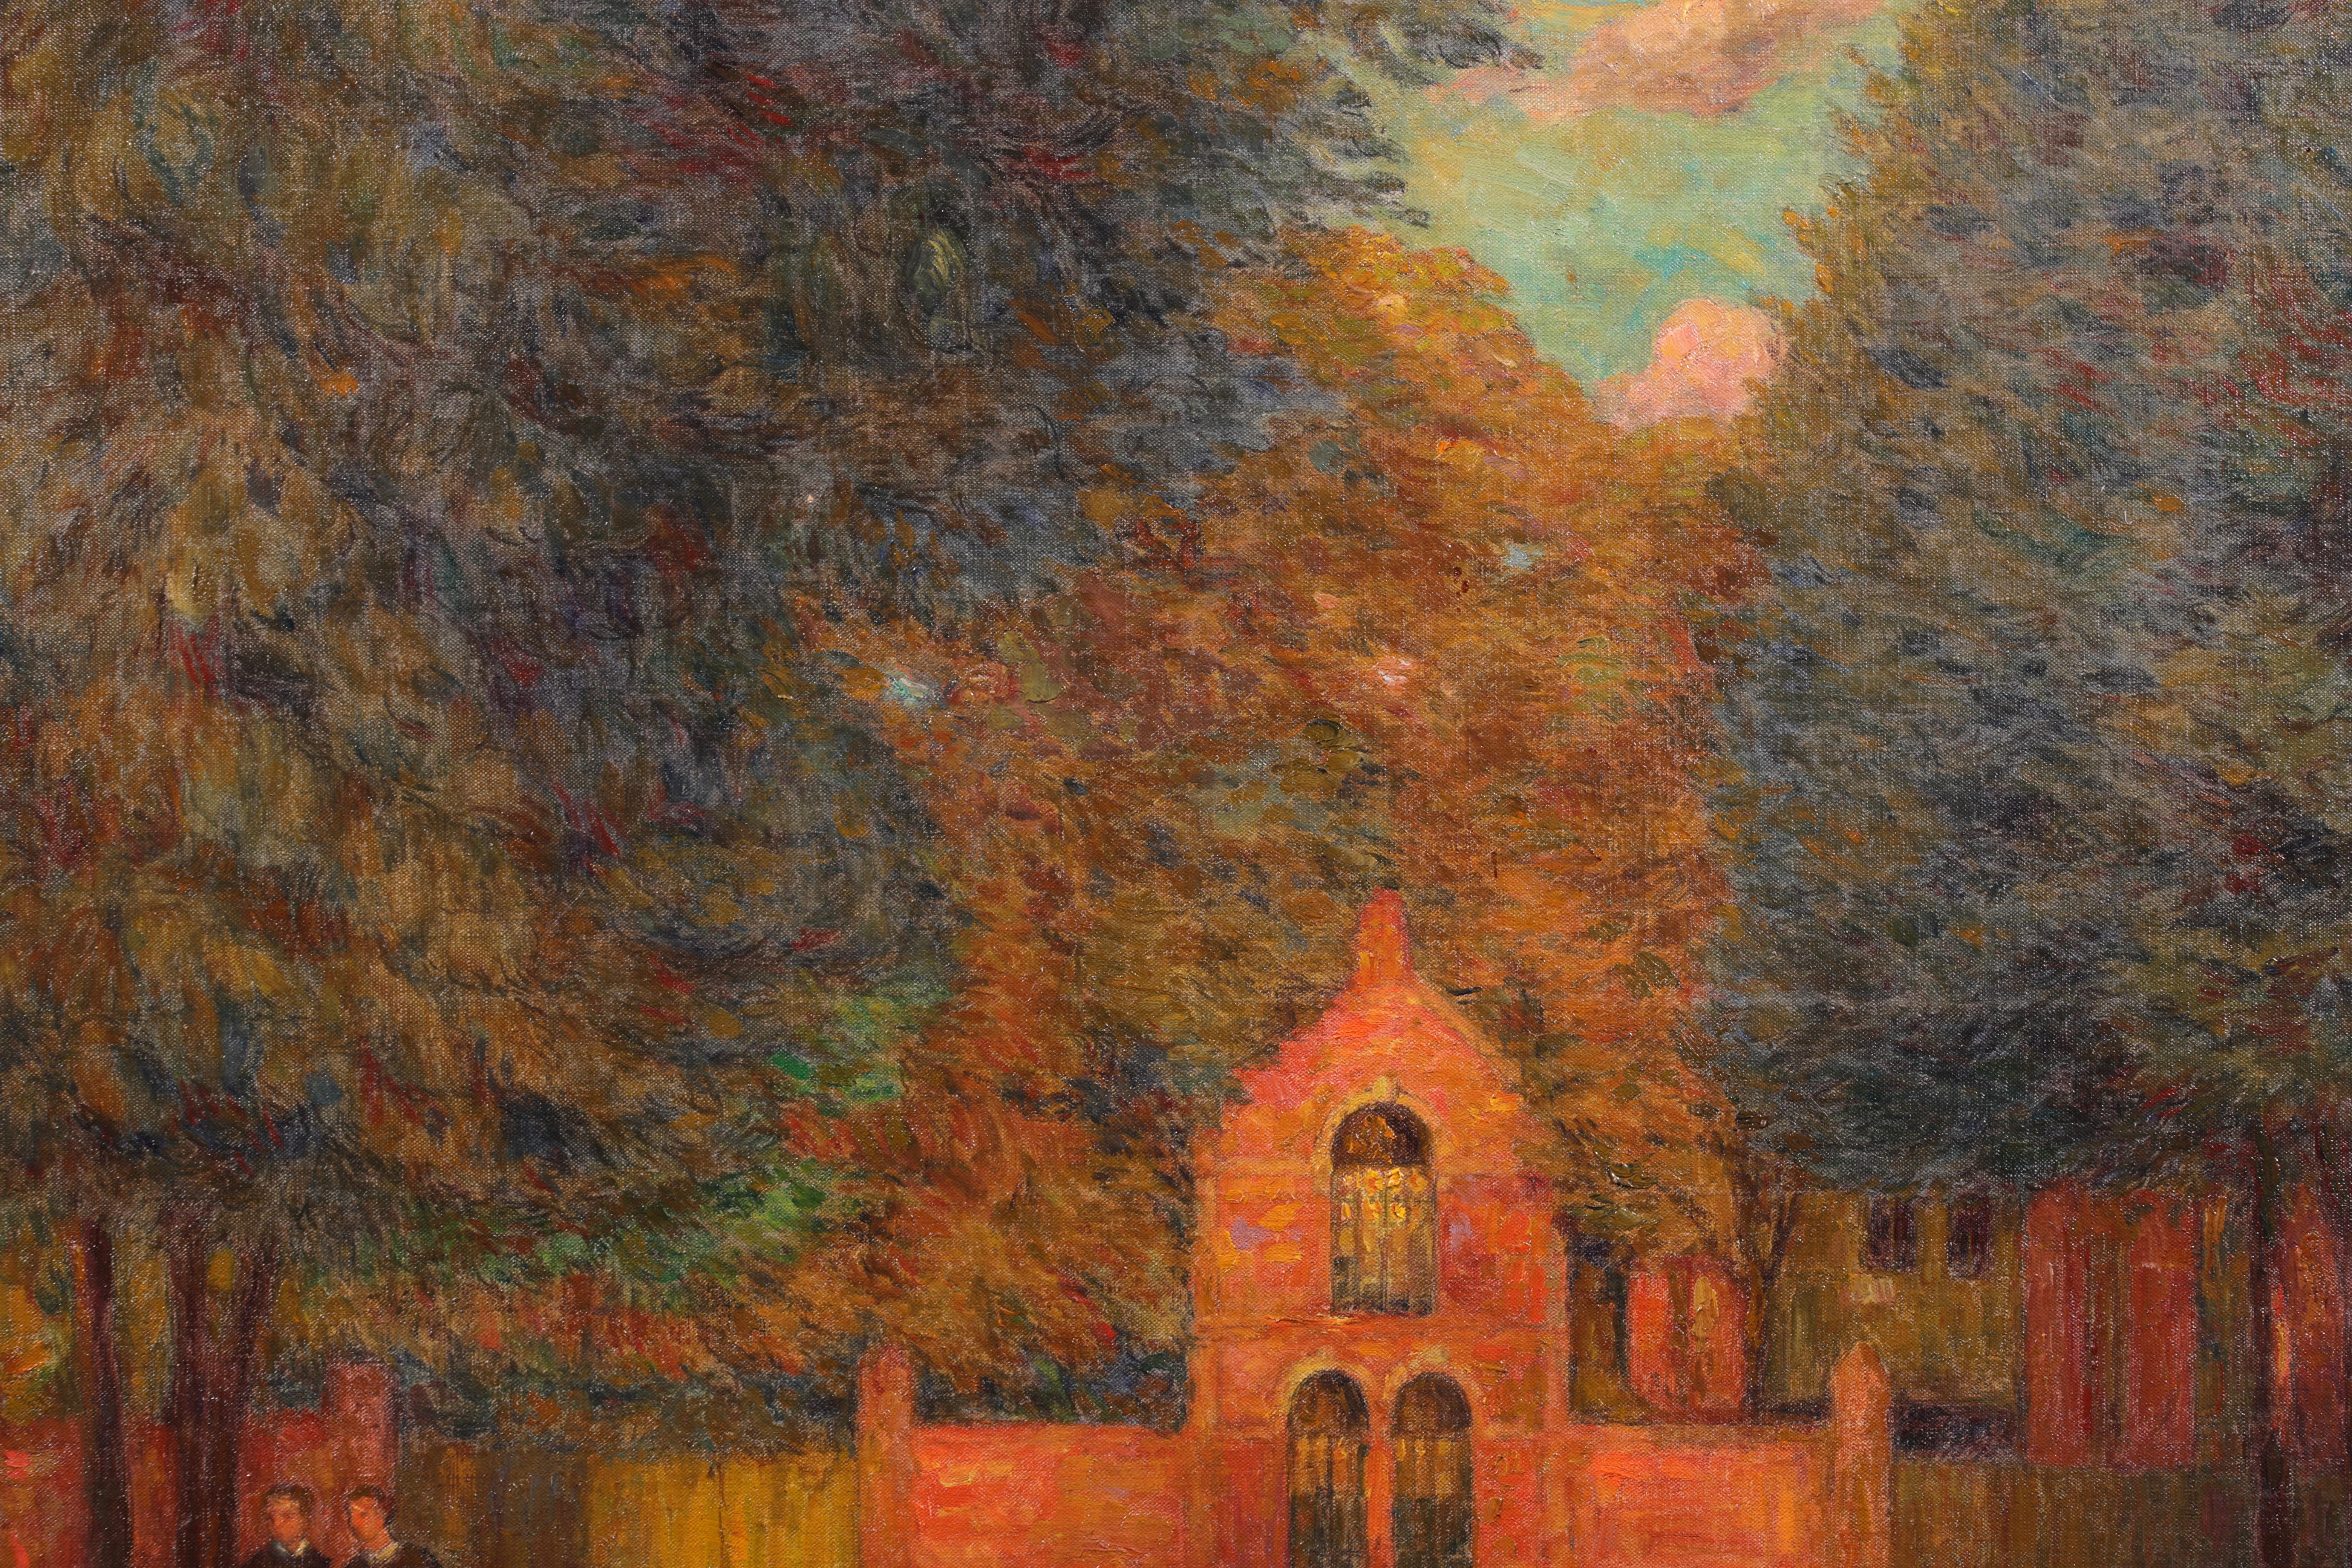 Signed impressionist landscape oil on original canvas circa 1920 by French painter Marie Duhem. The work depicts a view of a red-bricked church at the end of a tree-lined driveway. To the left of the painting a woman in a pink dress is seated under